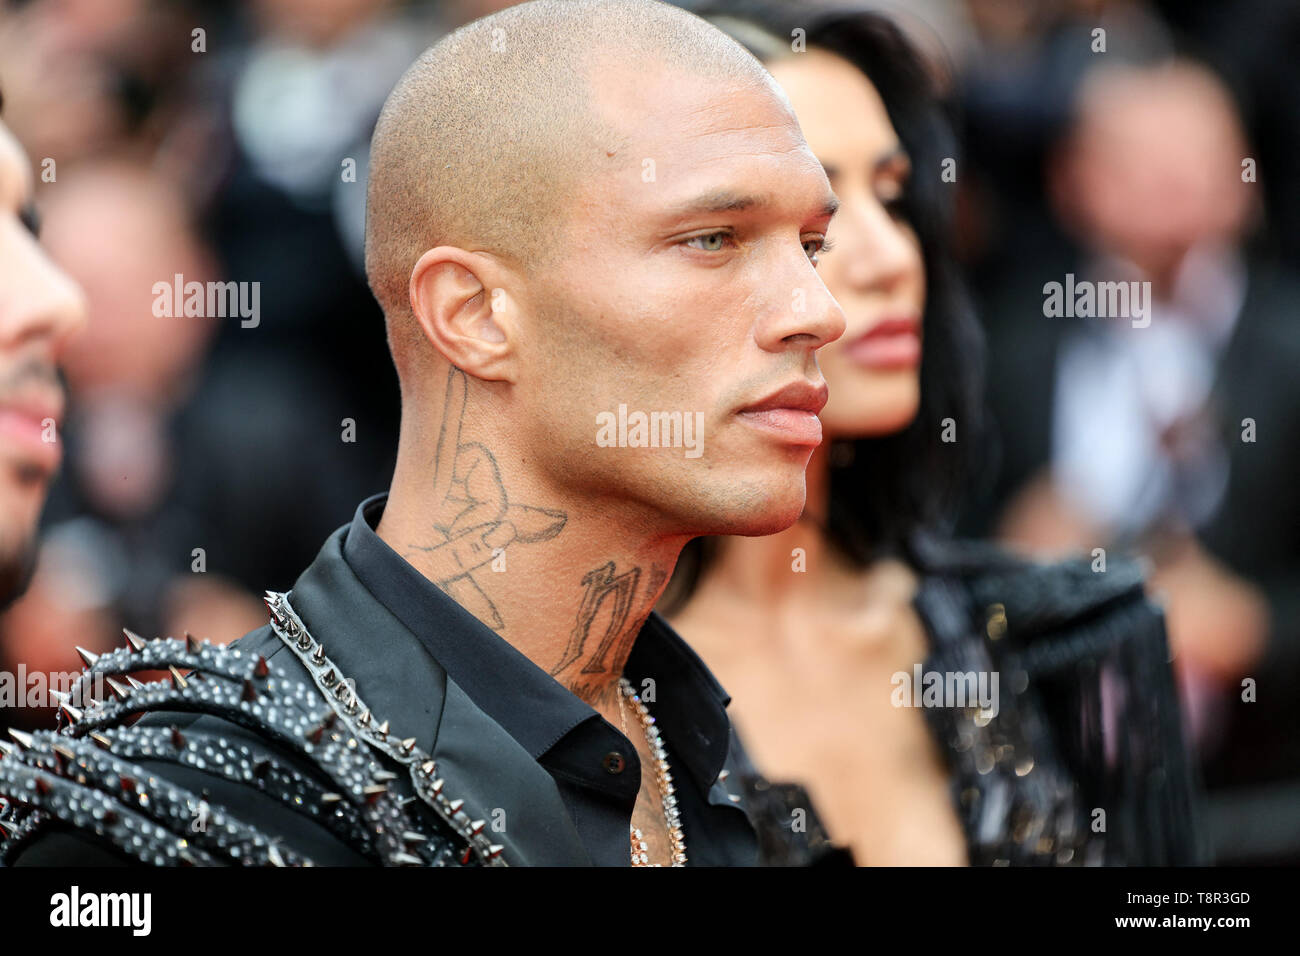 cannes-14th-may-2019-jeremy-meeks-arrives-to-the-premiere-of-the-dead-dont-die-during-the-2019-cannes-film-festival-on-may-14-2019-at-palais-des-festivals-in-cannes-france-credit-lyvans-boolakyimage-spacemedia-punchalamy-live-news-T8R3GD.jpg